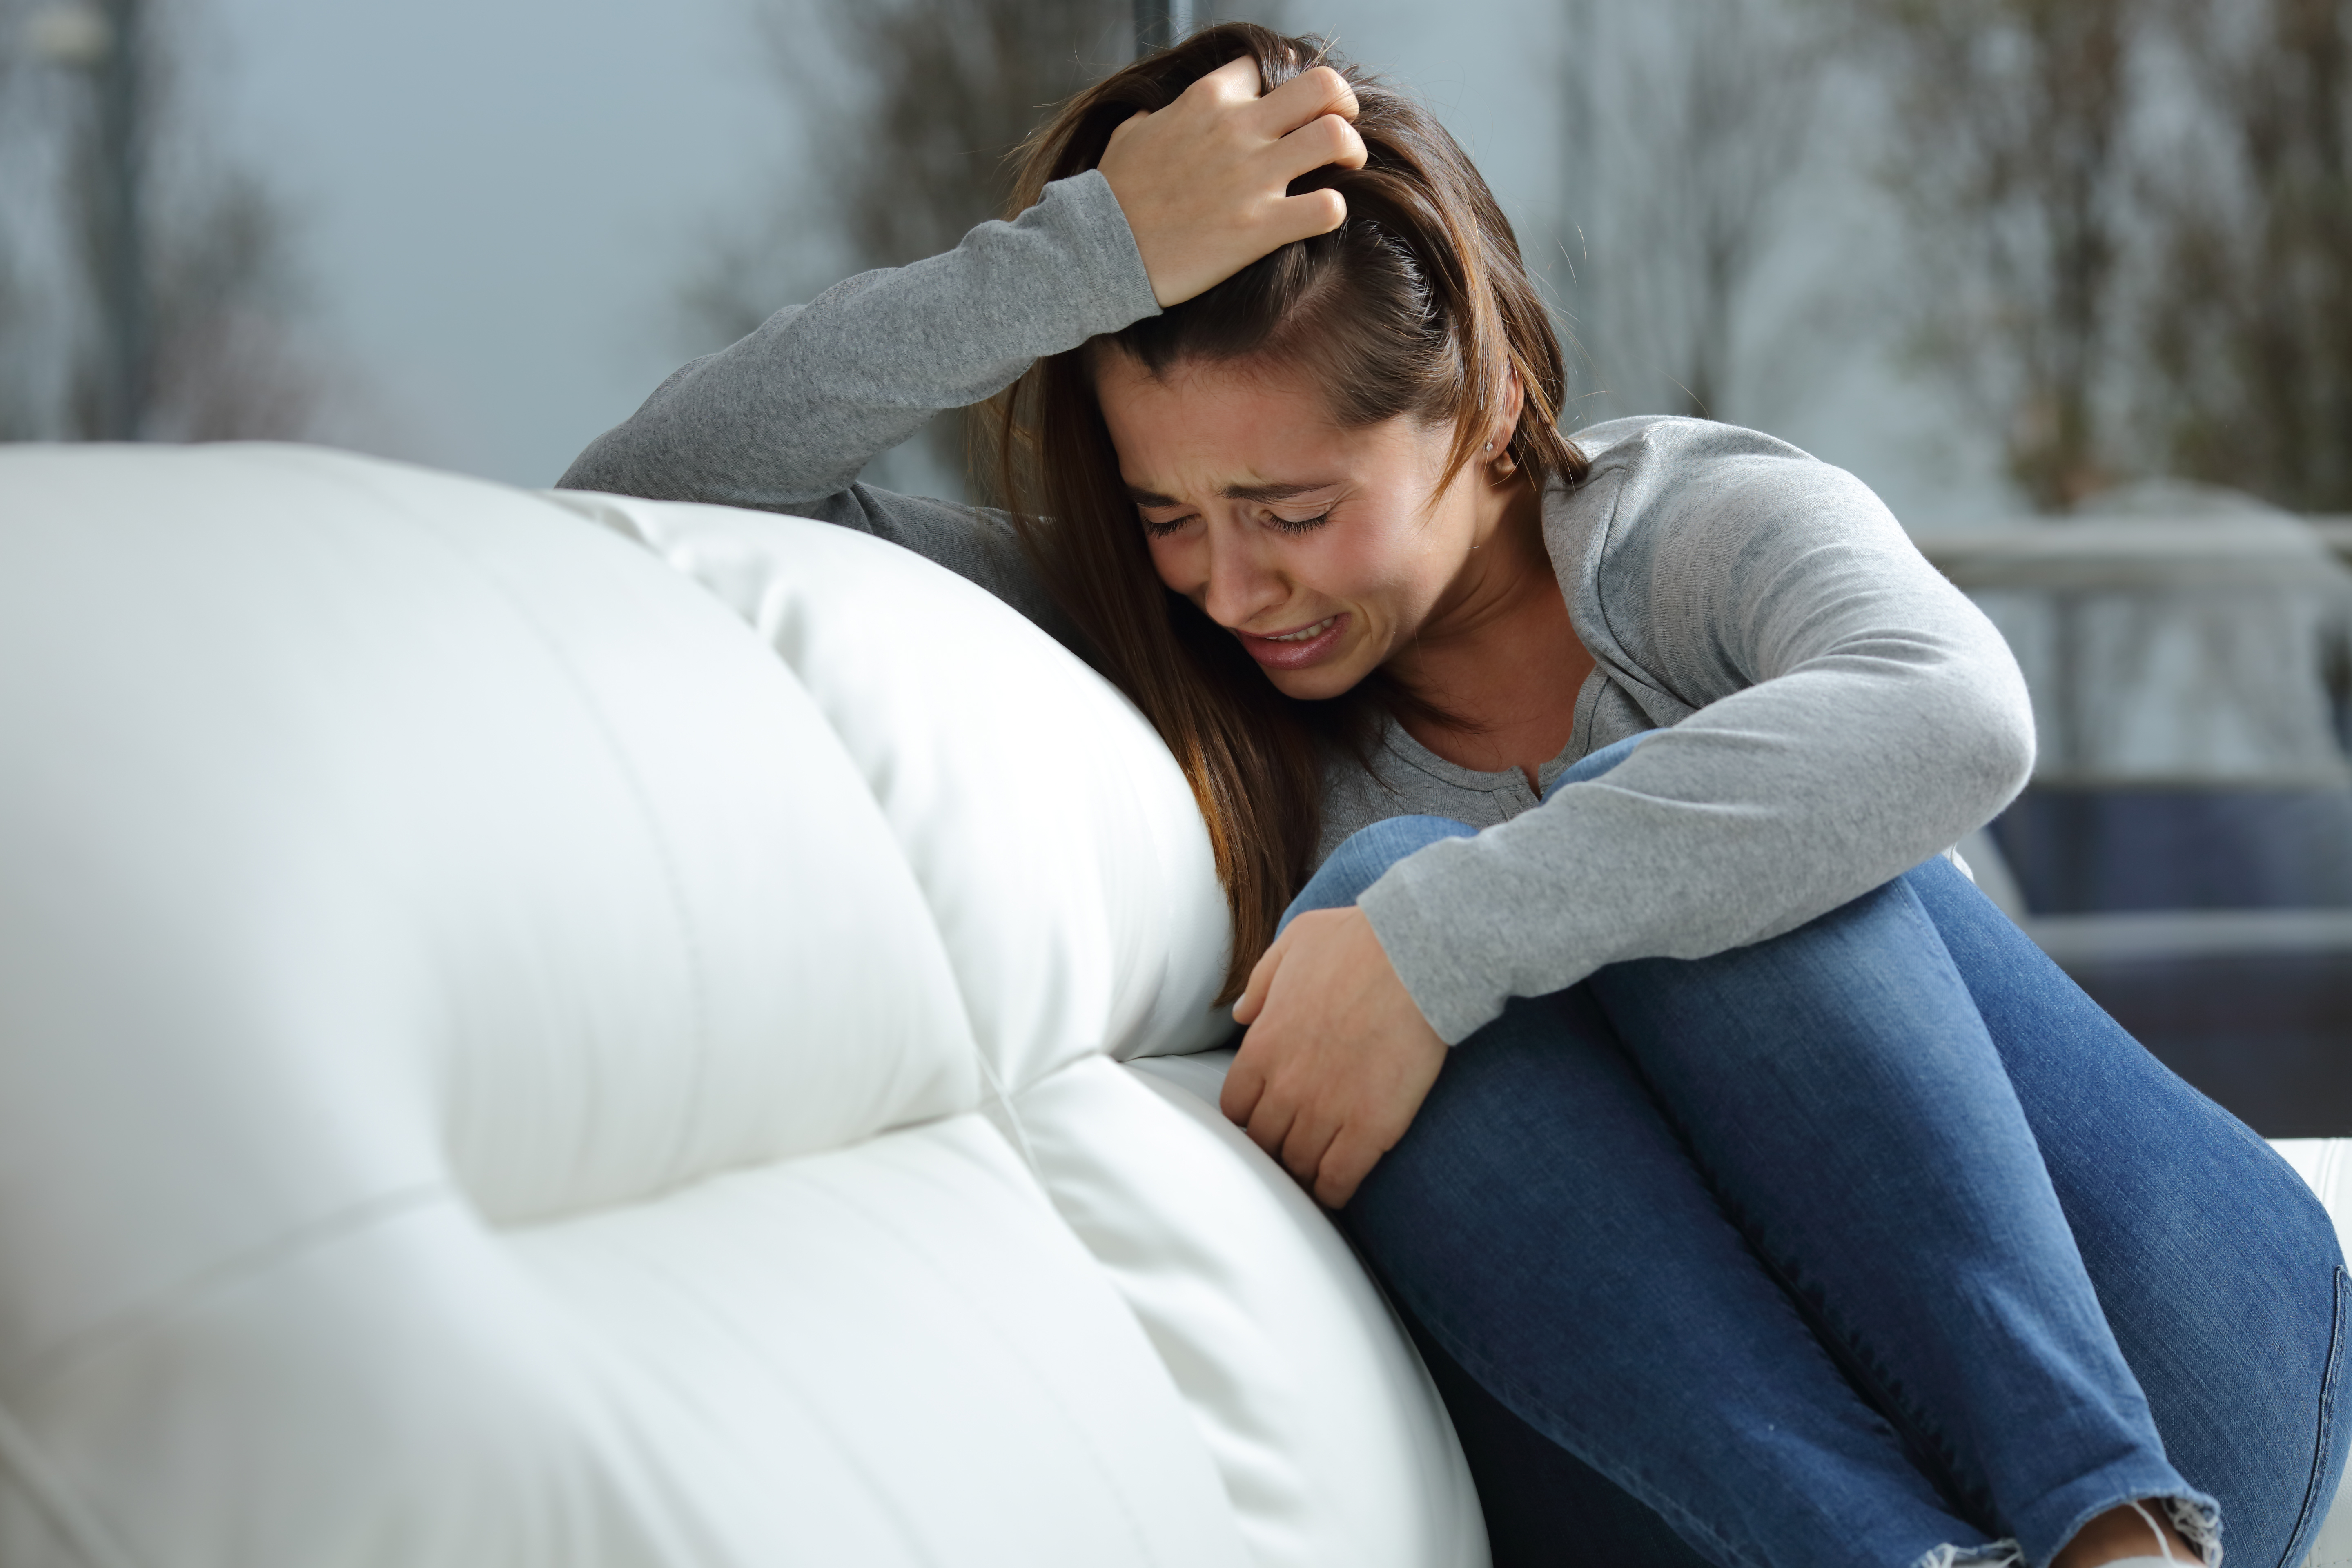 A girl crying on the couch | Source: Shutterstock